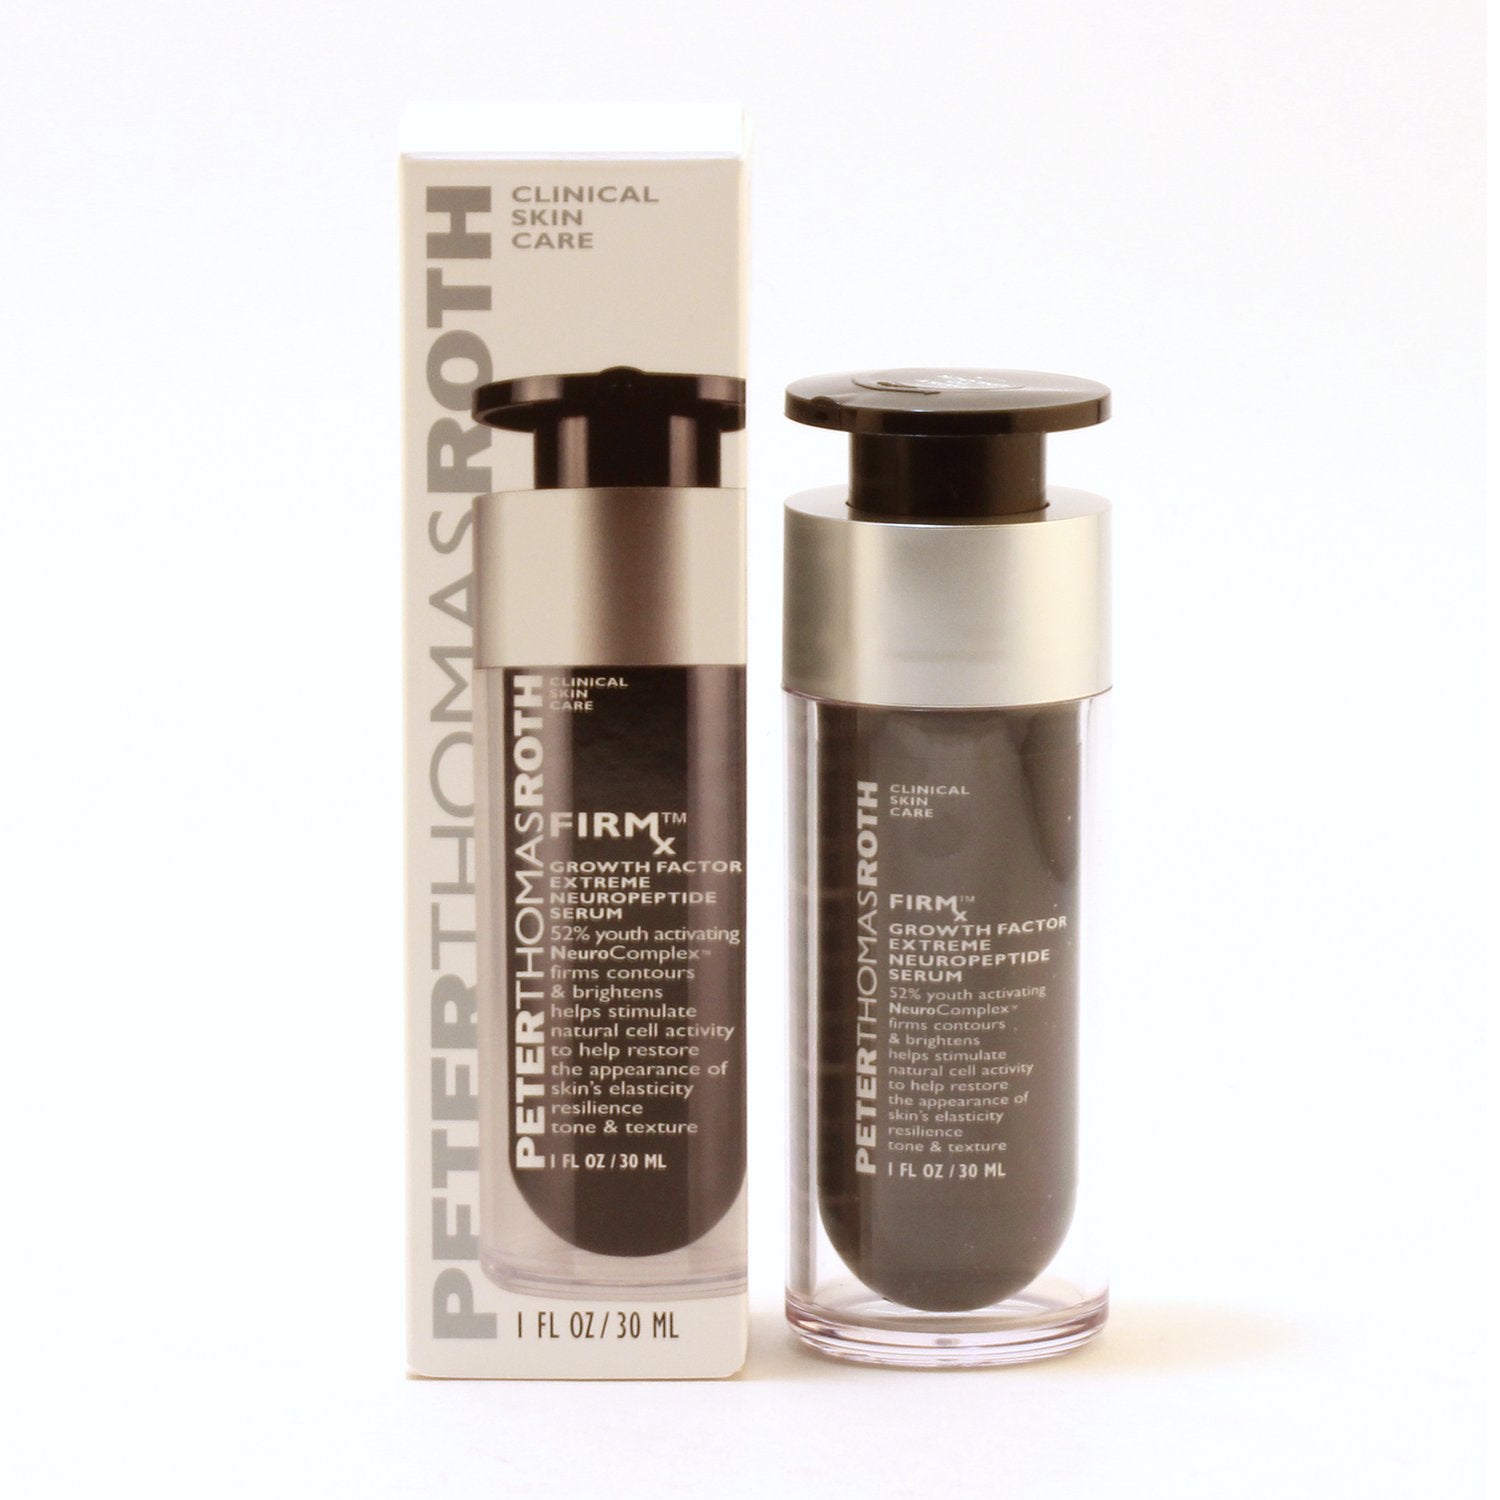 Skin Care - PETER THOMAS ROTH FIRMX GROWTH FACTOR XTREME NEUROPEPTIDE SERUM, 1.0 OZ